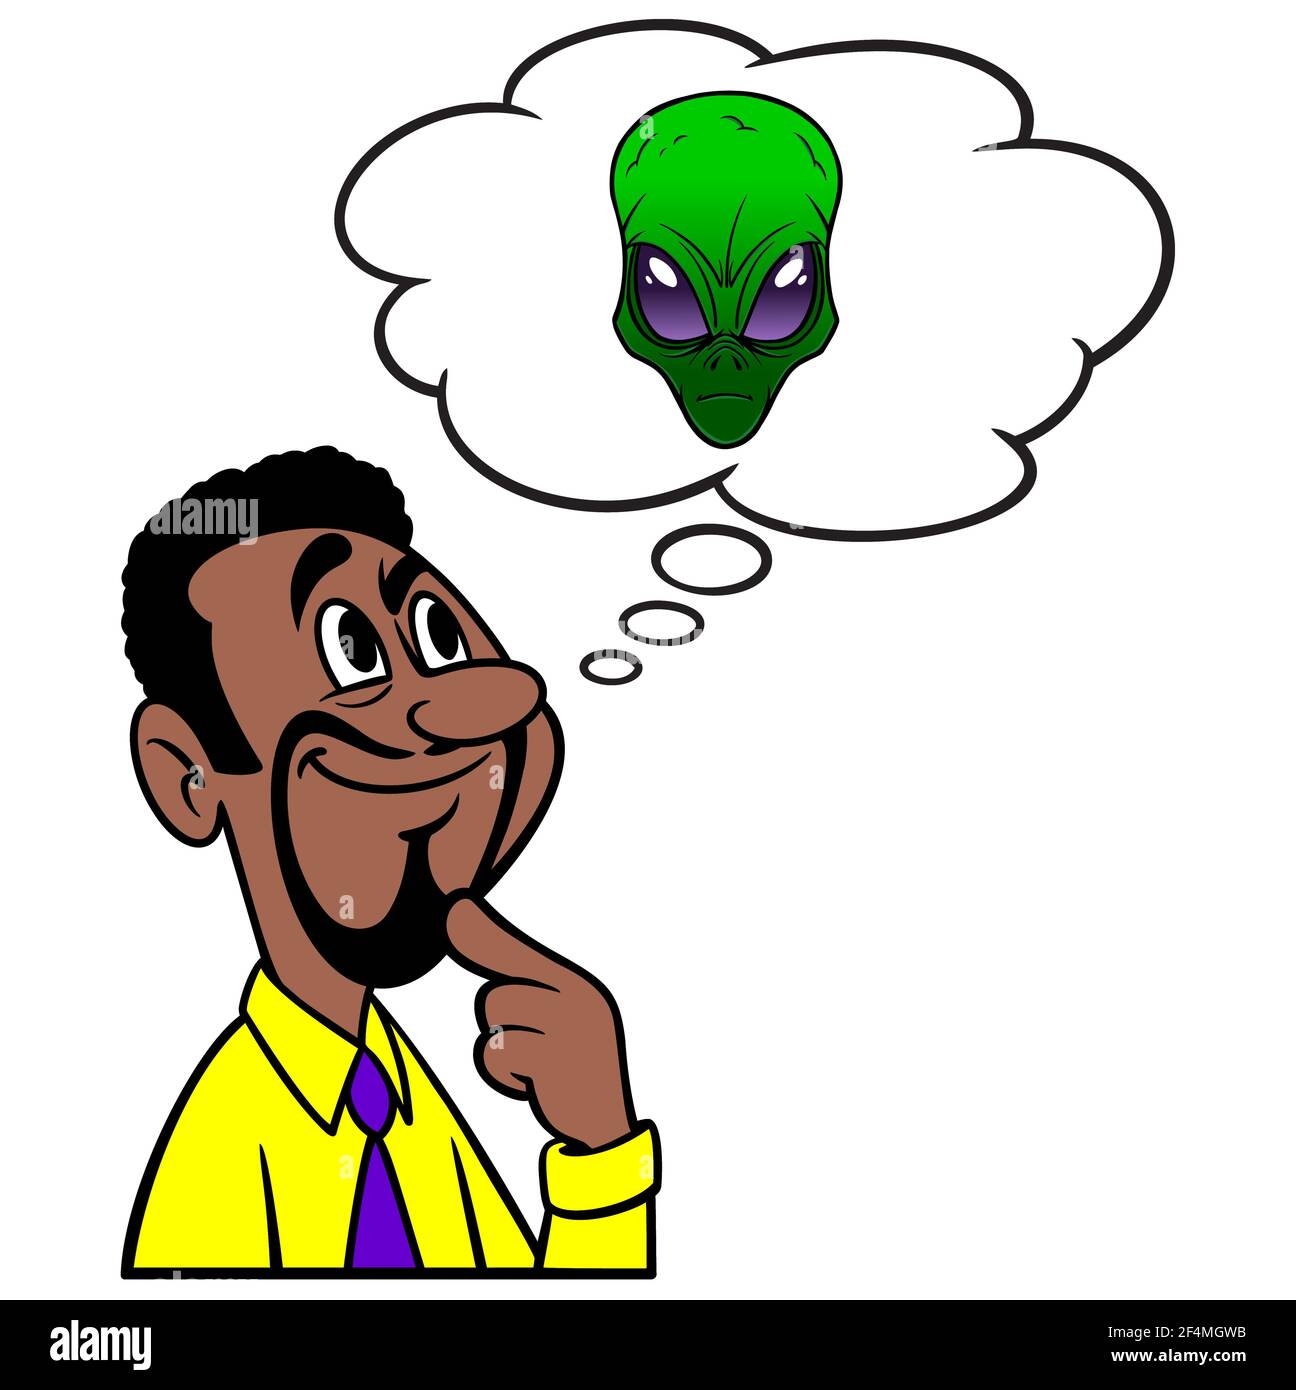 Man thinking about Aliens - A cartoon illustration of a man thinking about Aliens. Stock Vector